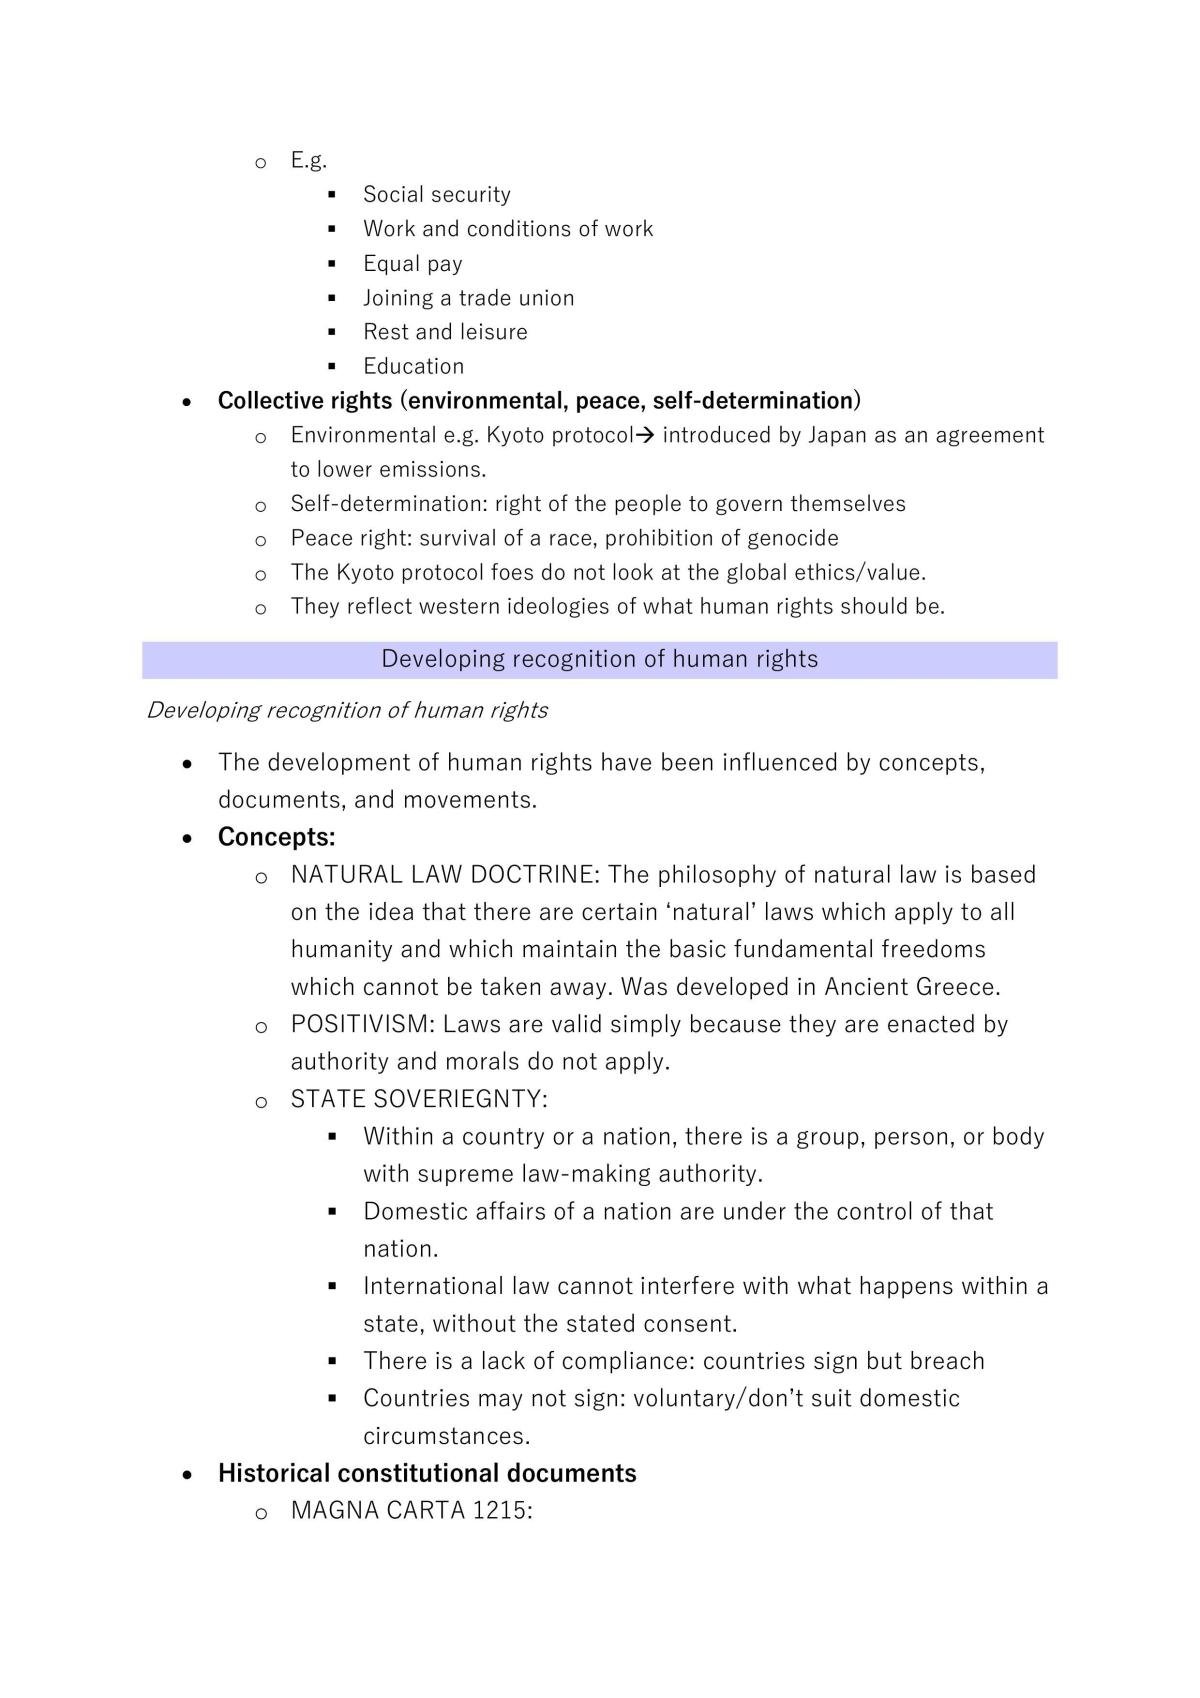 Human Rights Study Notes - Page 3